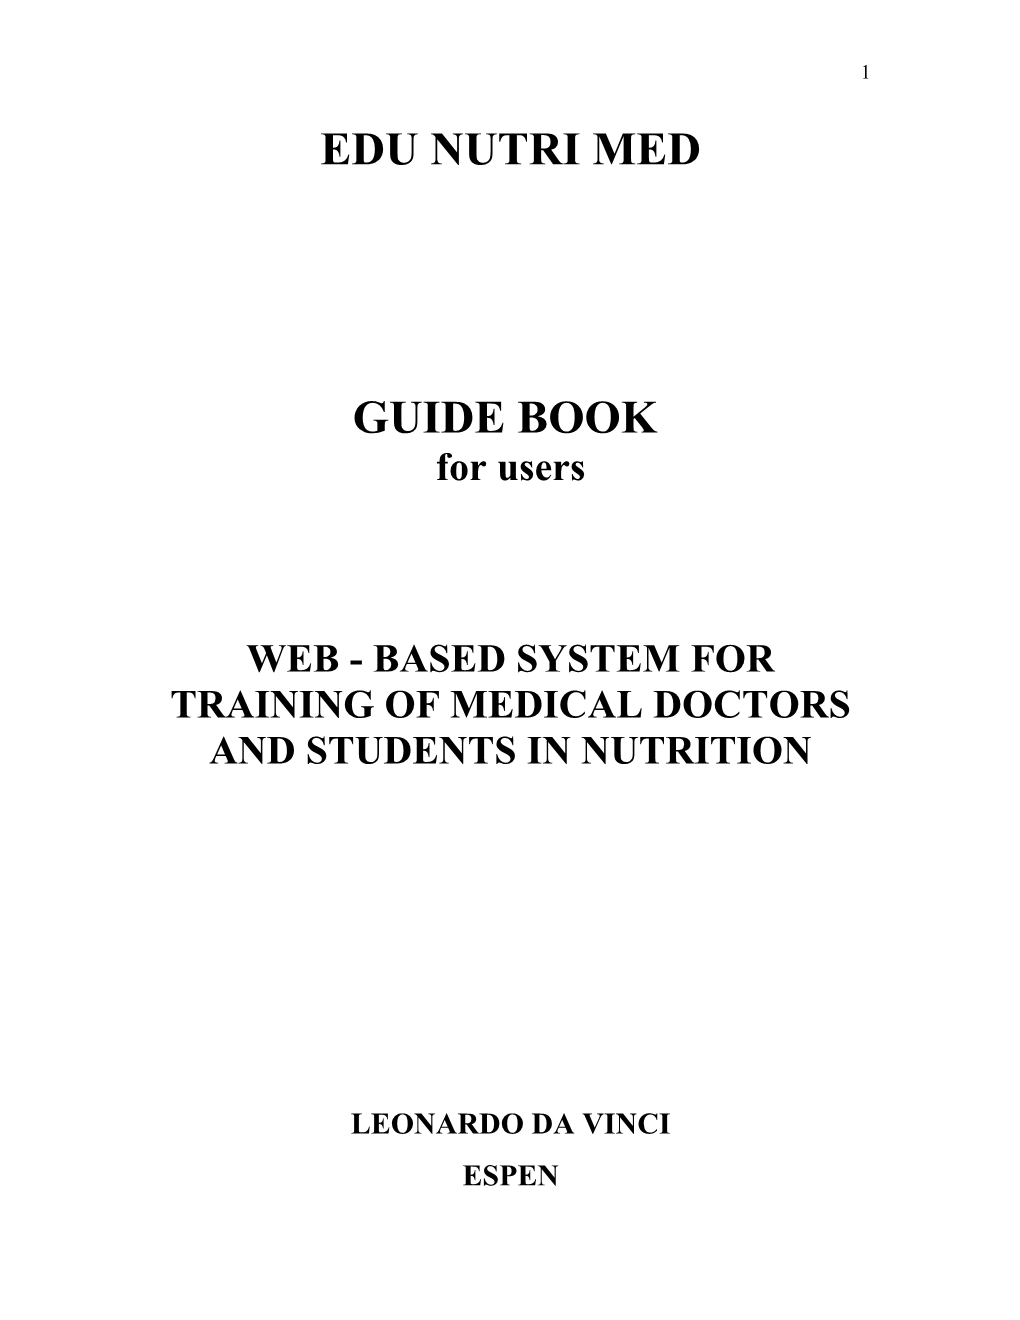 Web - Based System for Training of Medical Doctors and Students in Nutrition